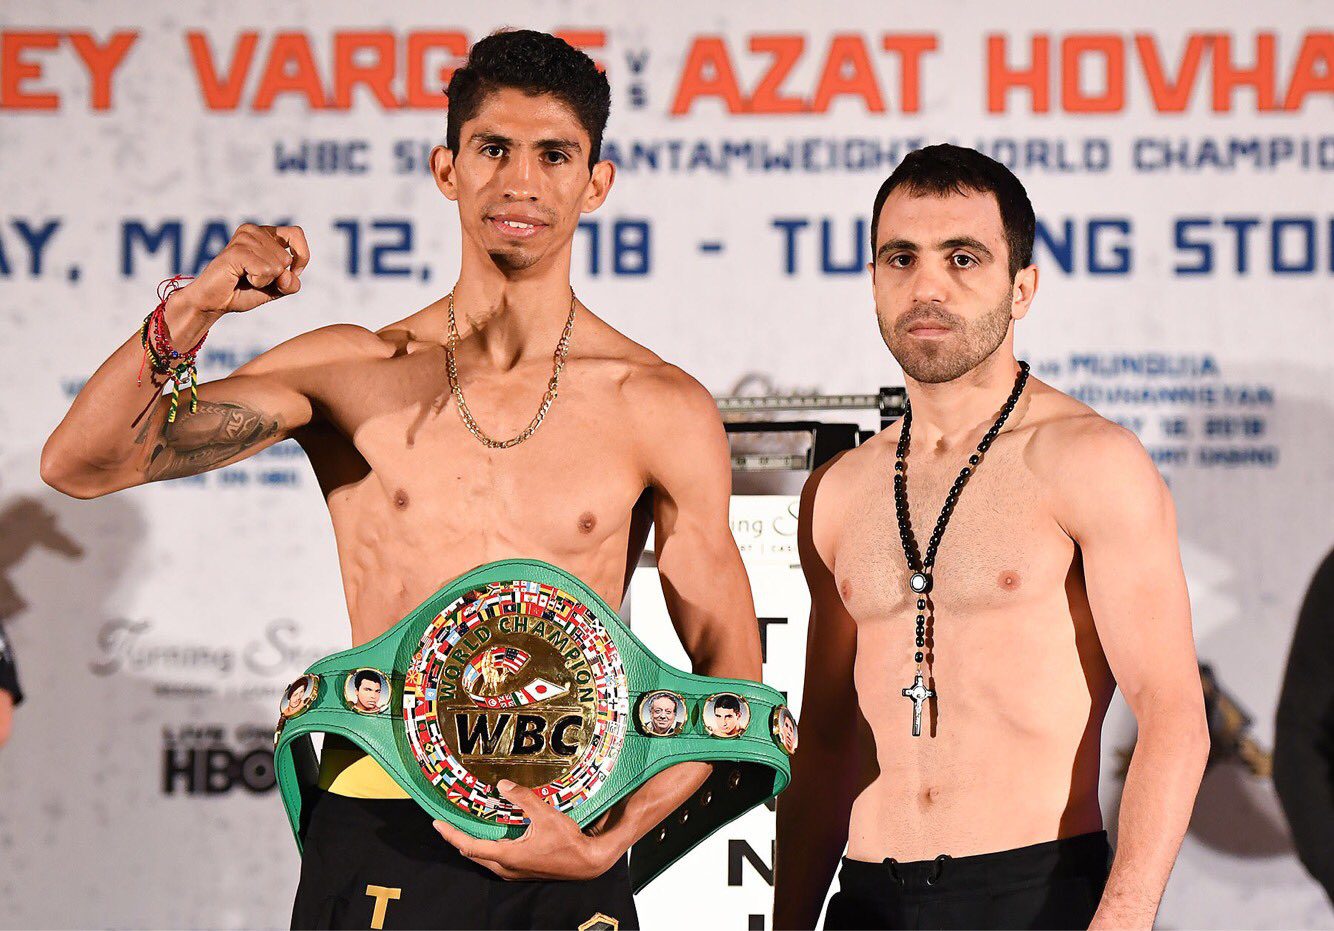 Ray Vargas and Izzat Hovhannisyan were the second fighters to have faced Nacho and Freddy (Image: Twitter / @UCNlive)